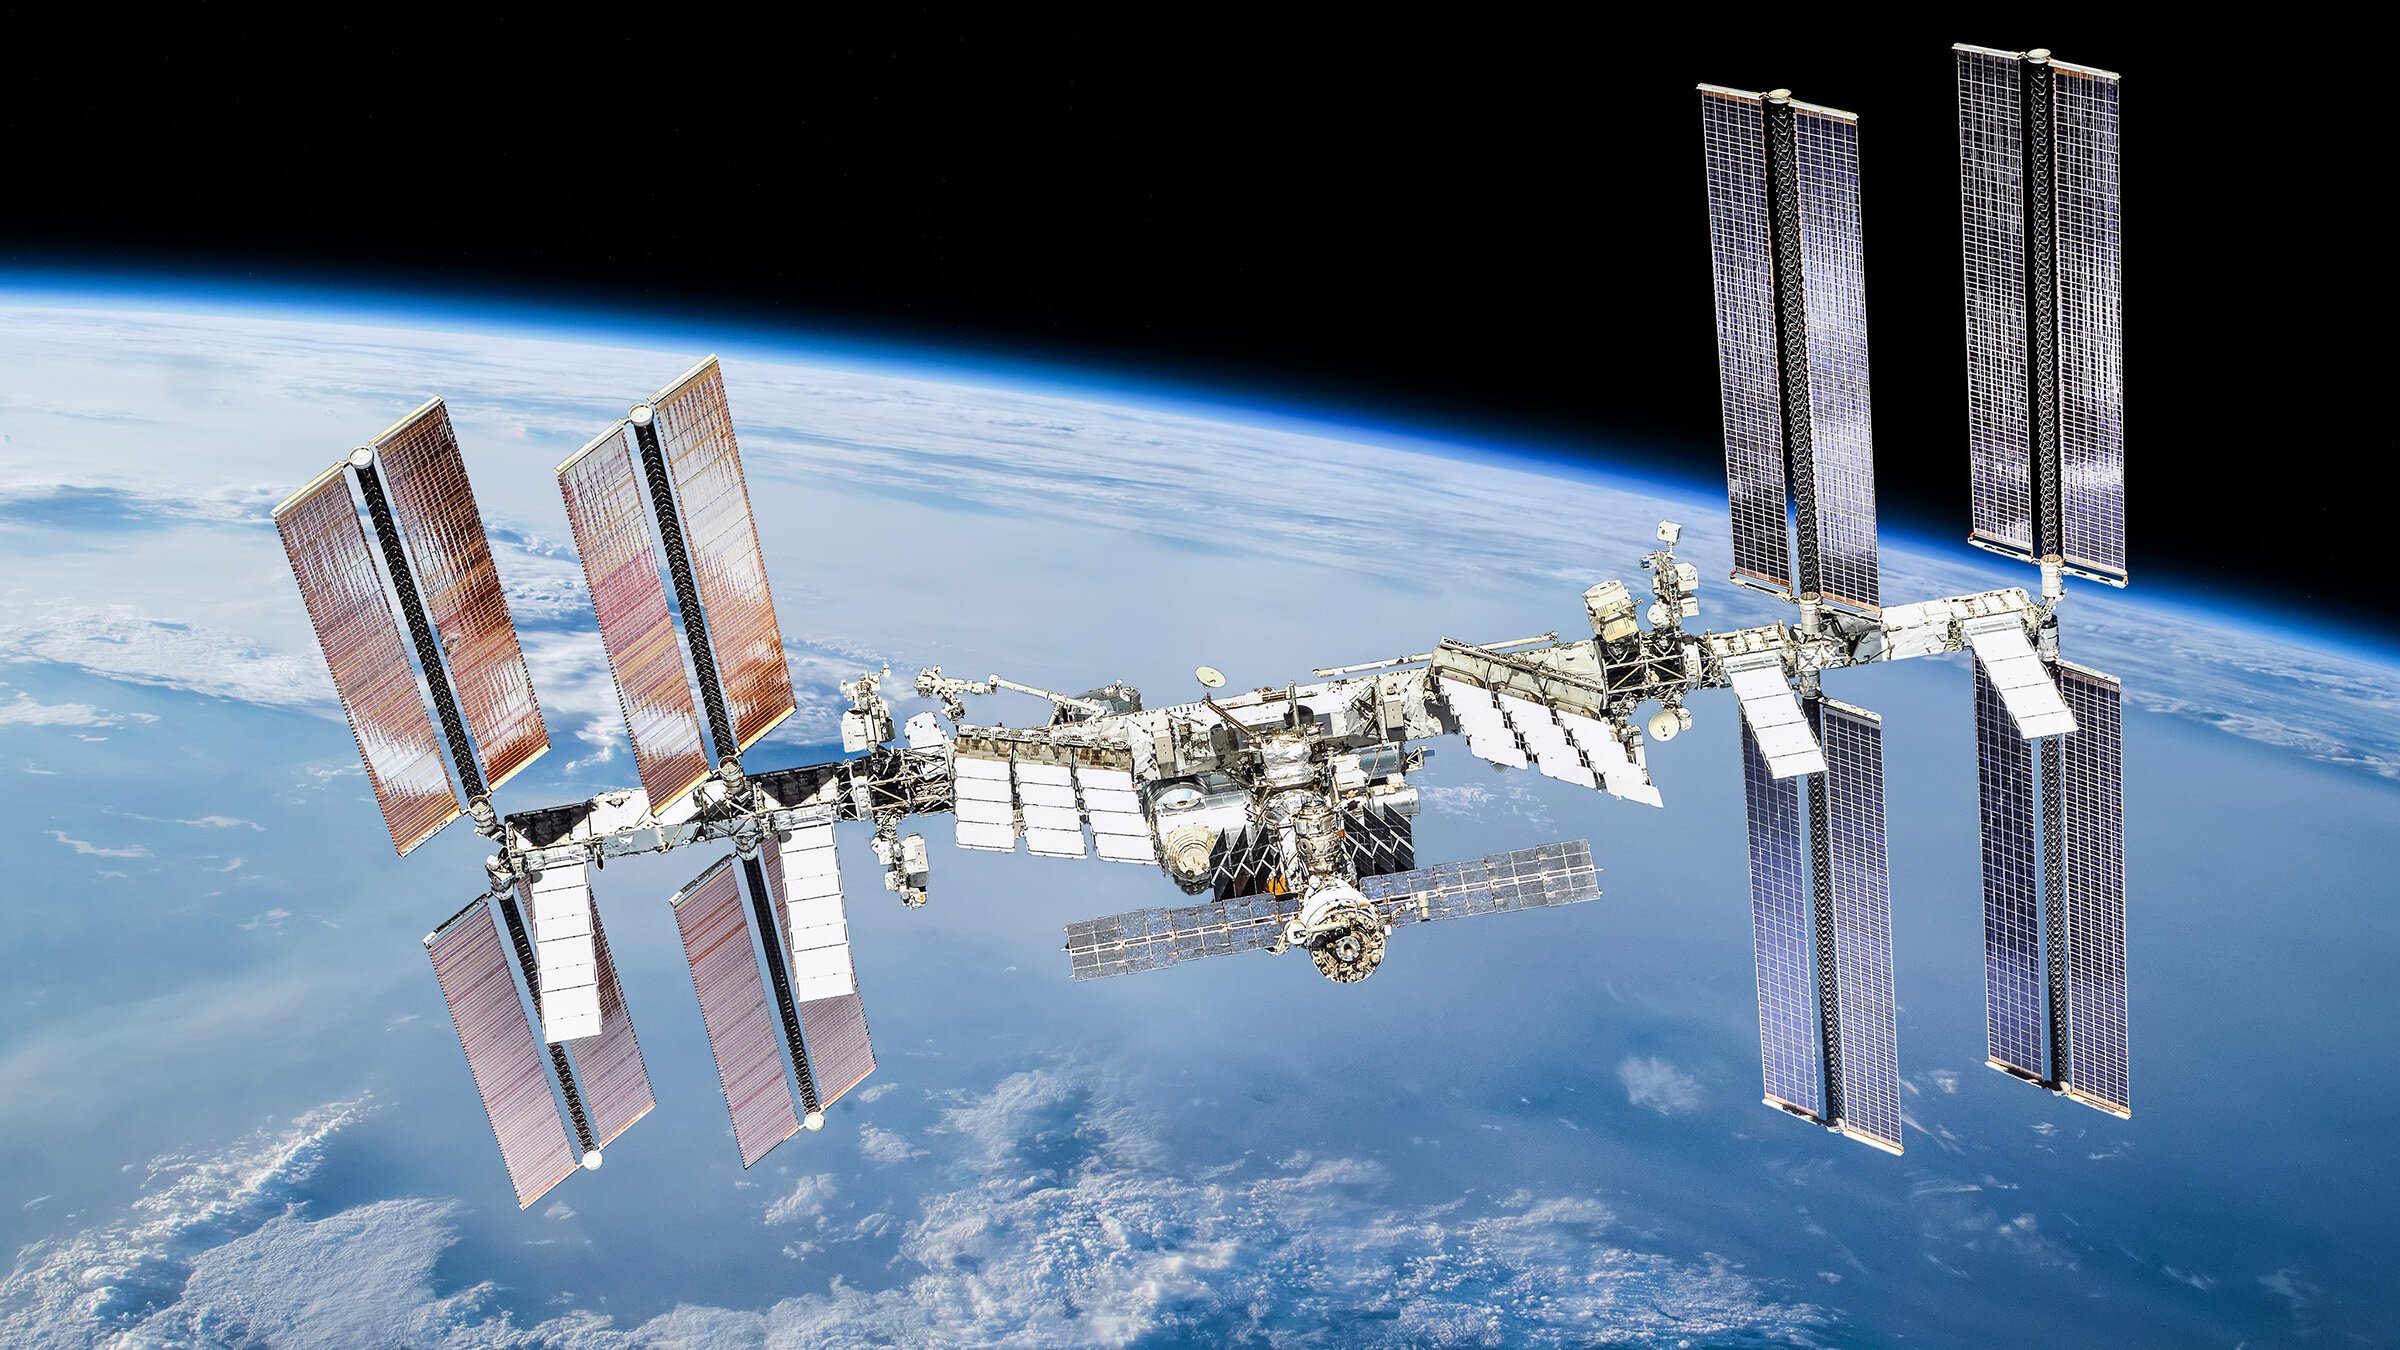 UK Firm Gets Nearly $400K to Make Medicine in Space